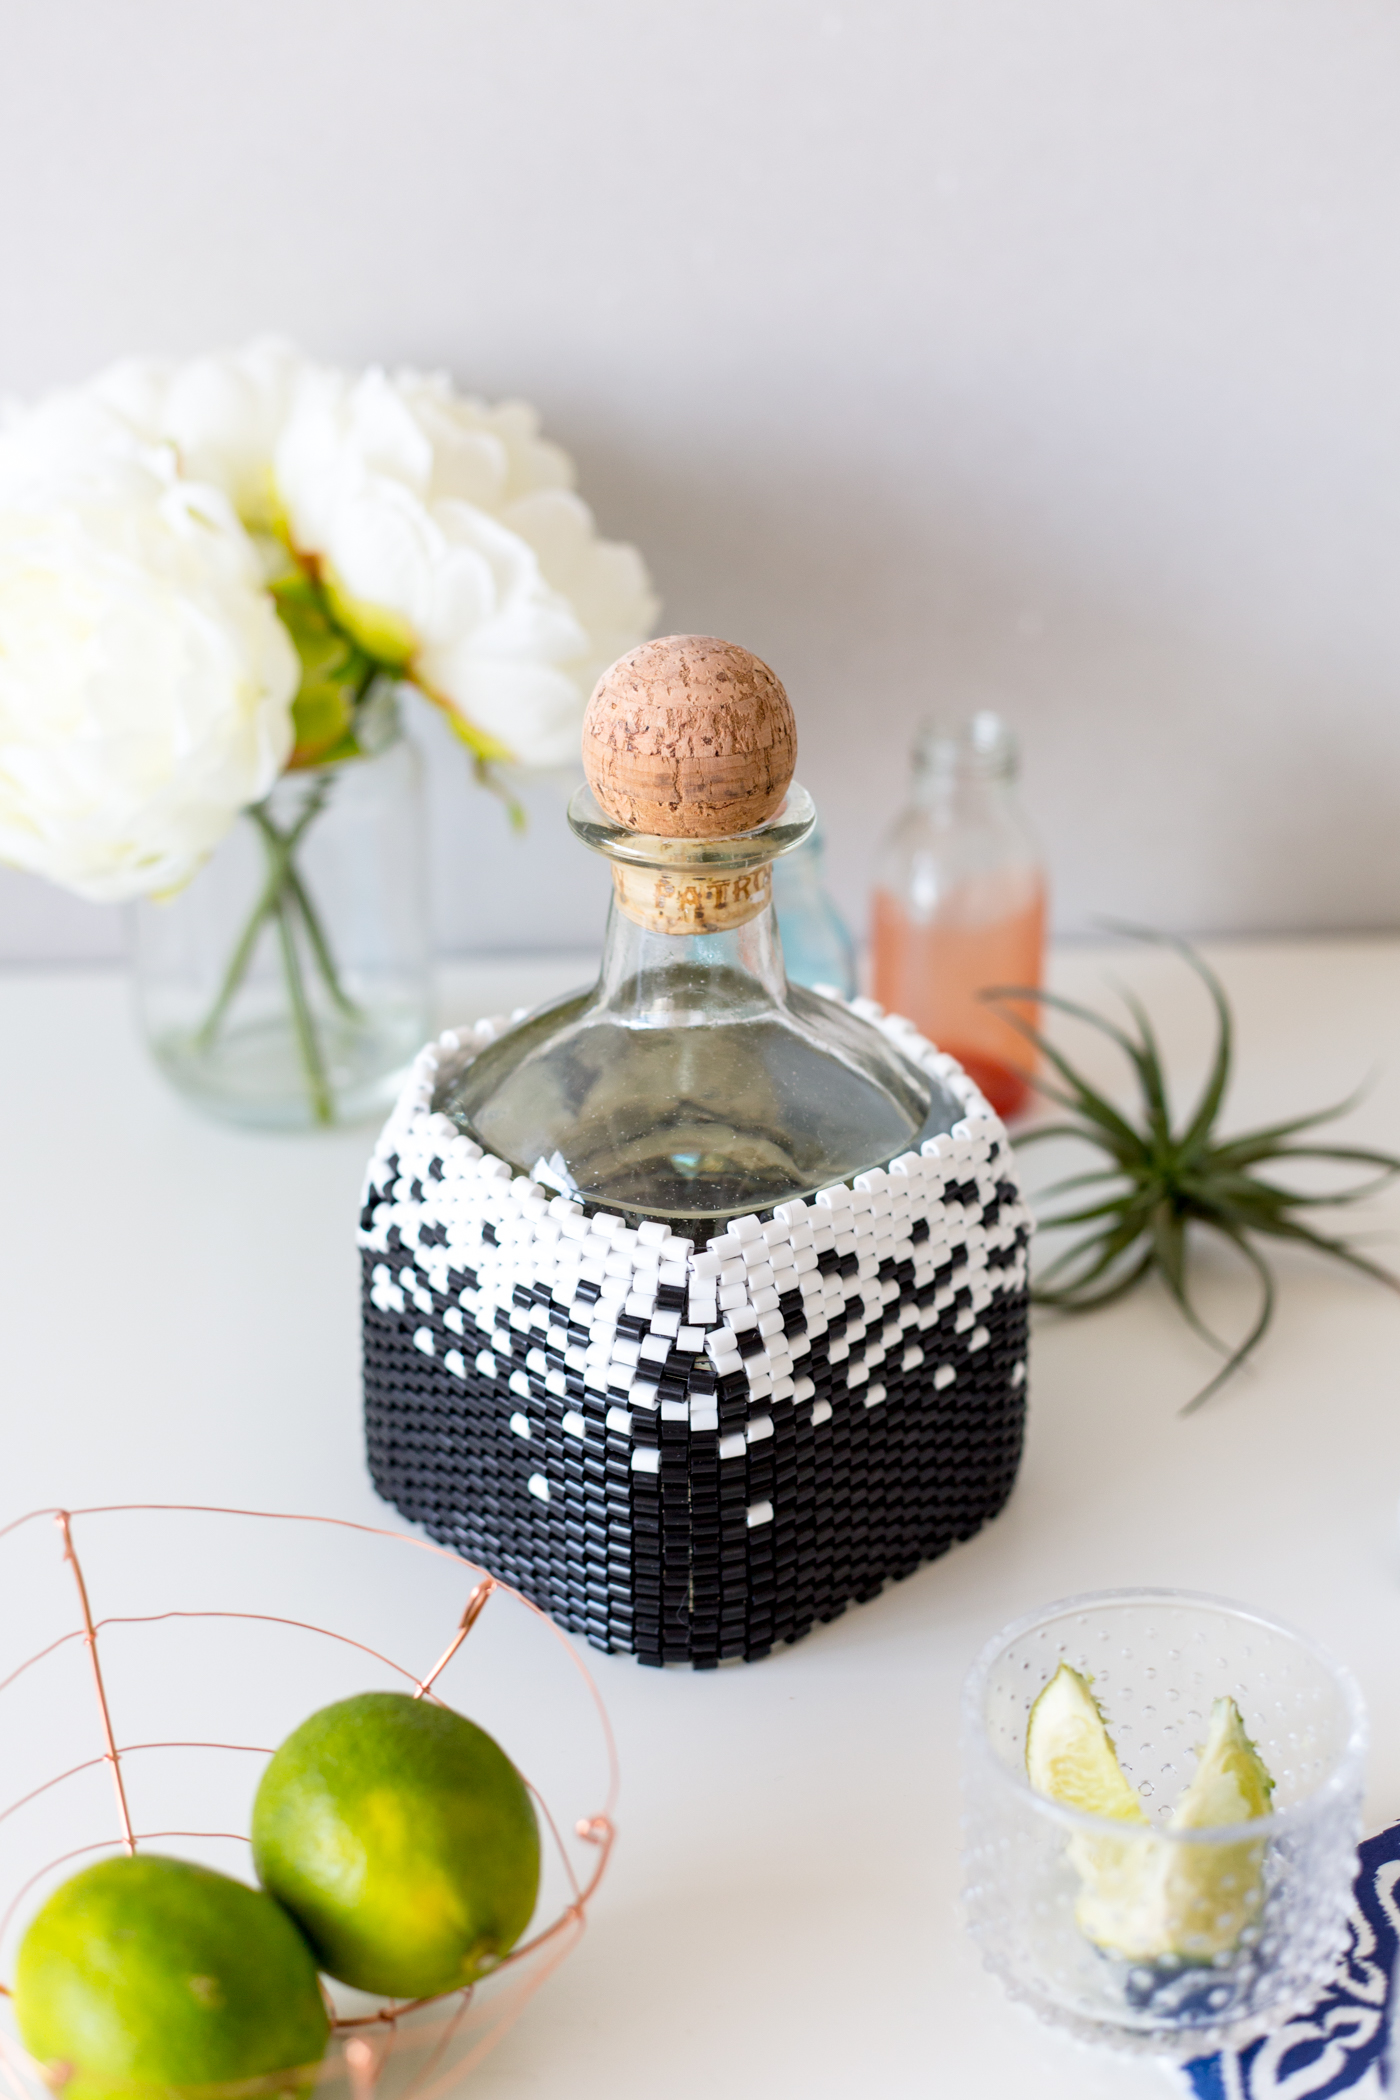 diy-beaded-bottle-cover-in-peyote-stitch-with-tutorial-fallfordiy-8